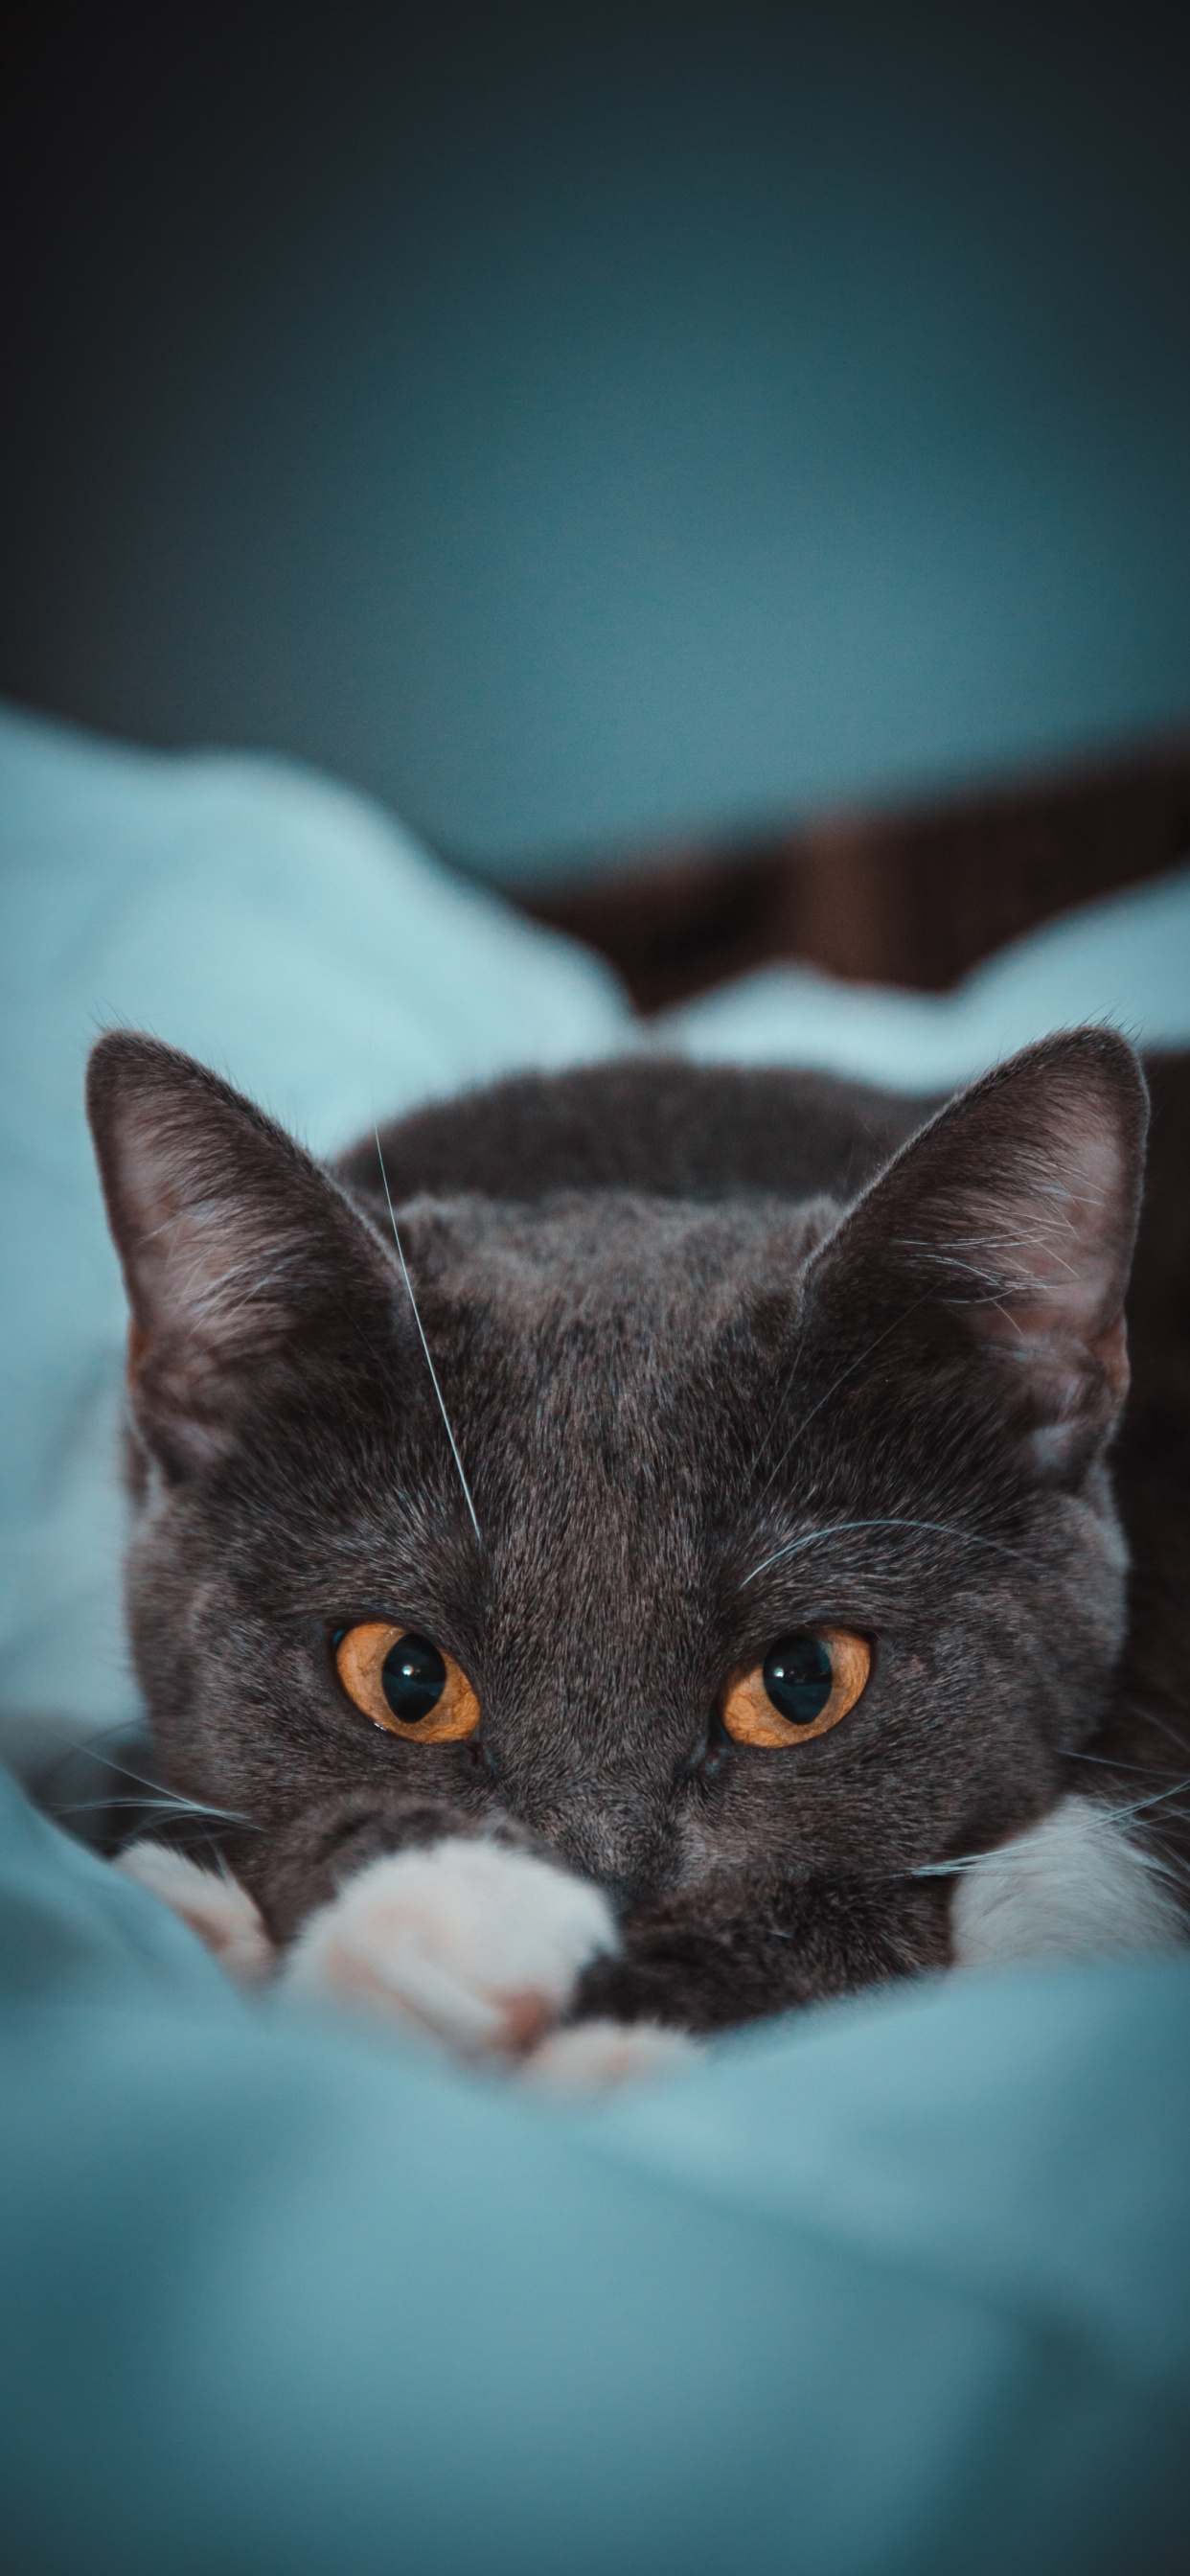 Black and White Cat on Teal Textile. Wallpaper in 1242x2688 Resolution